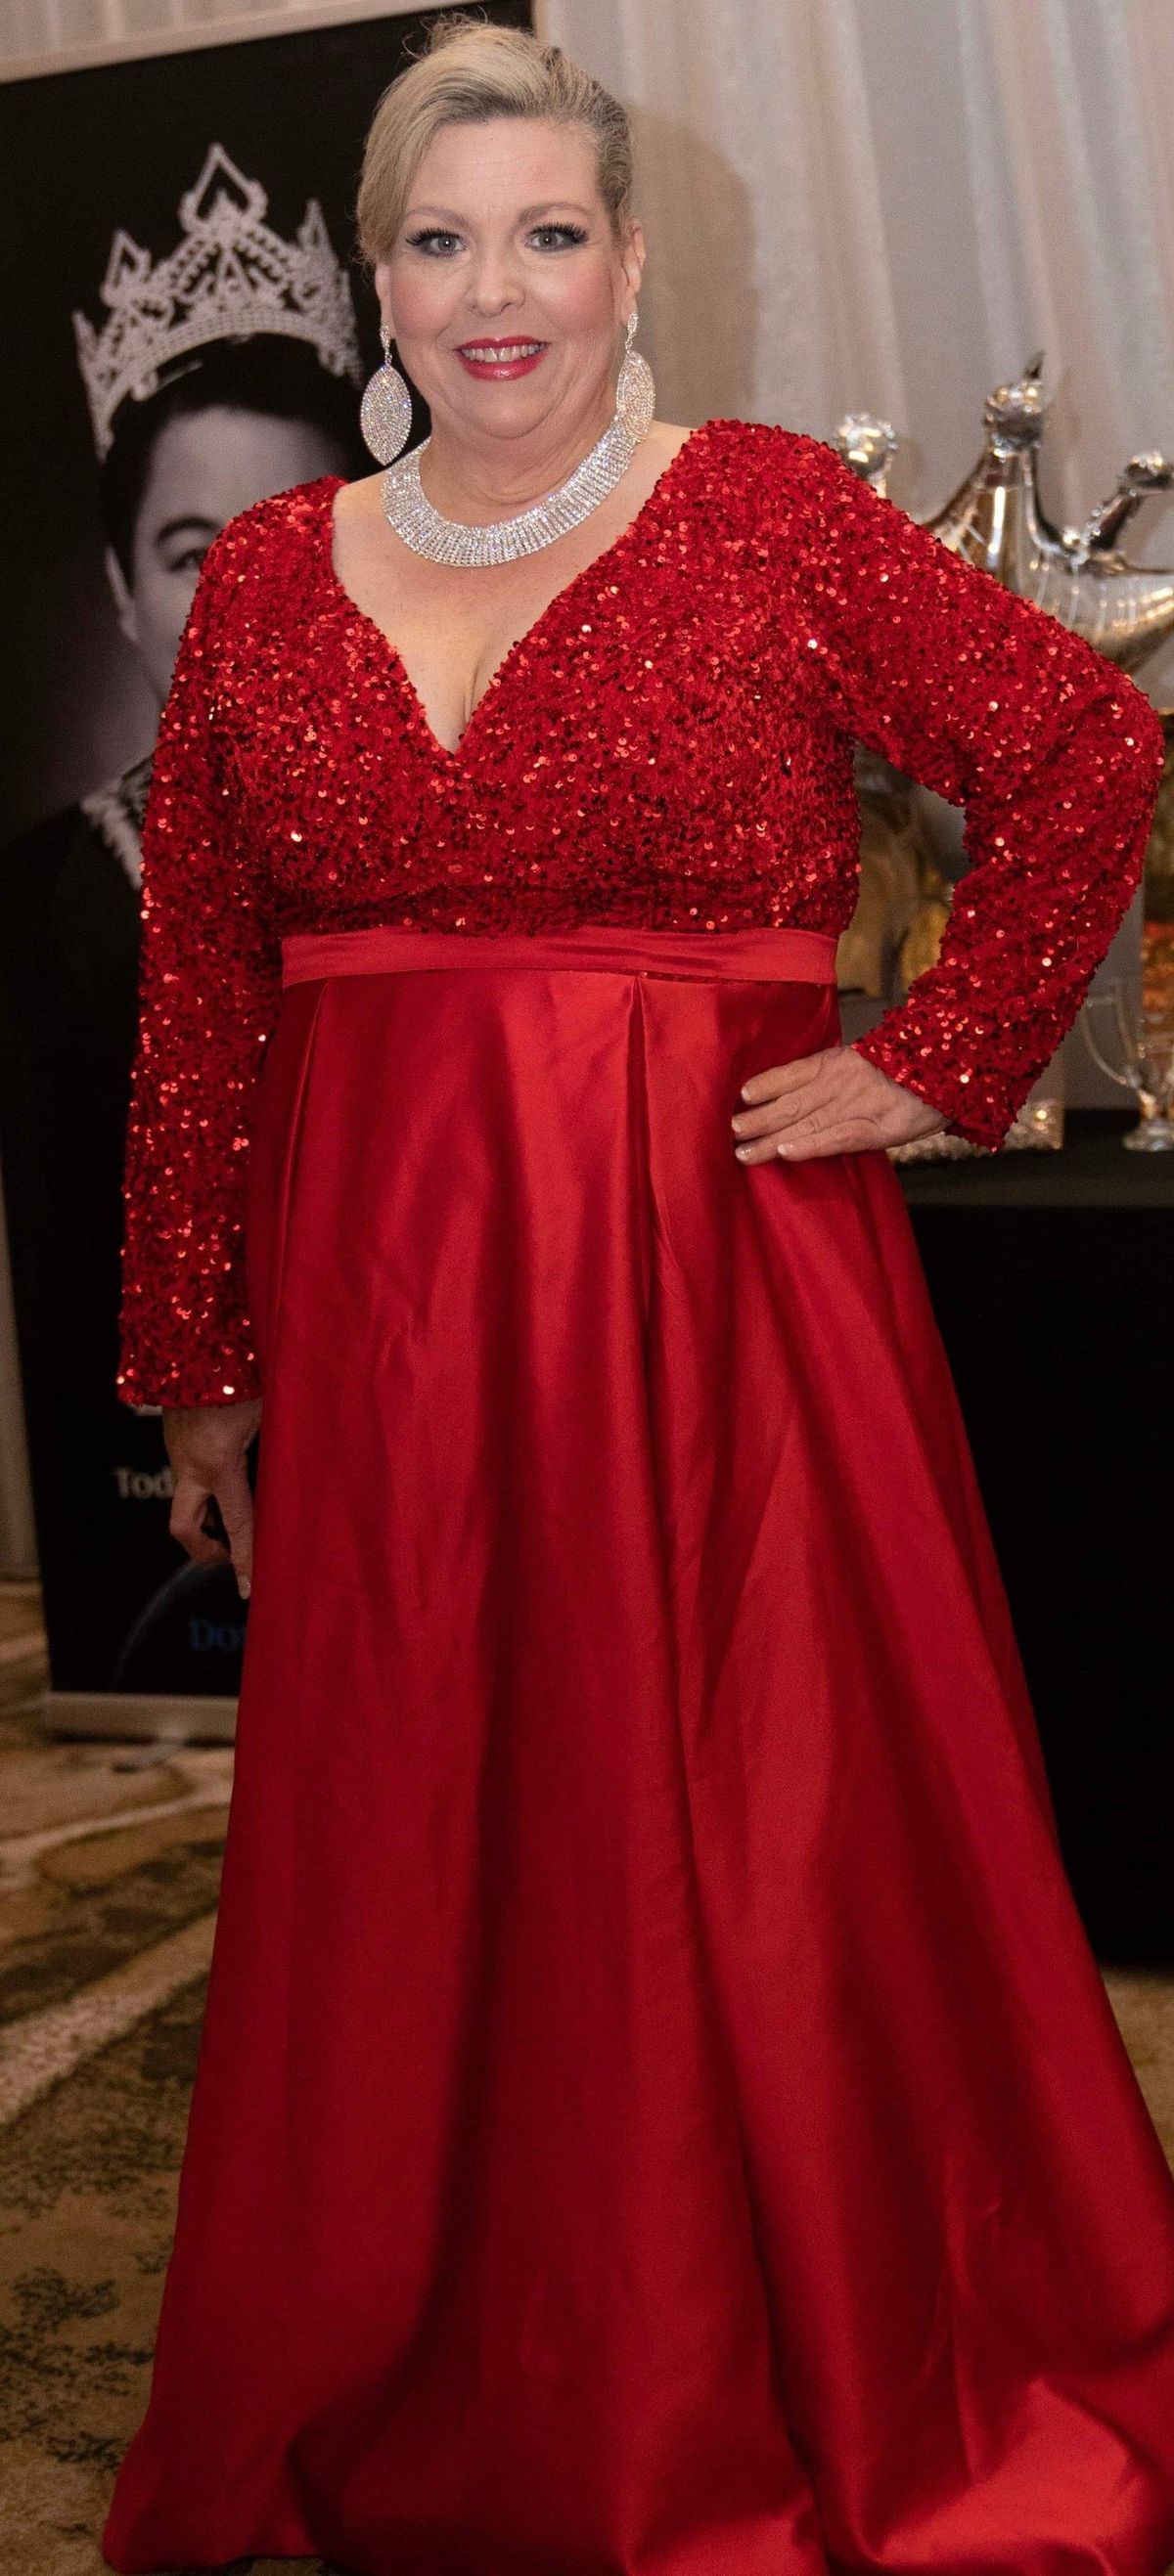 formal plus size red dresses